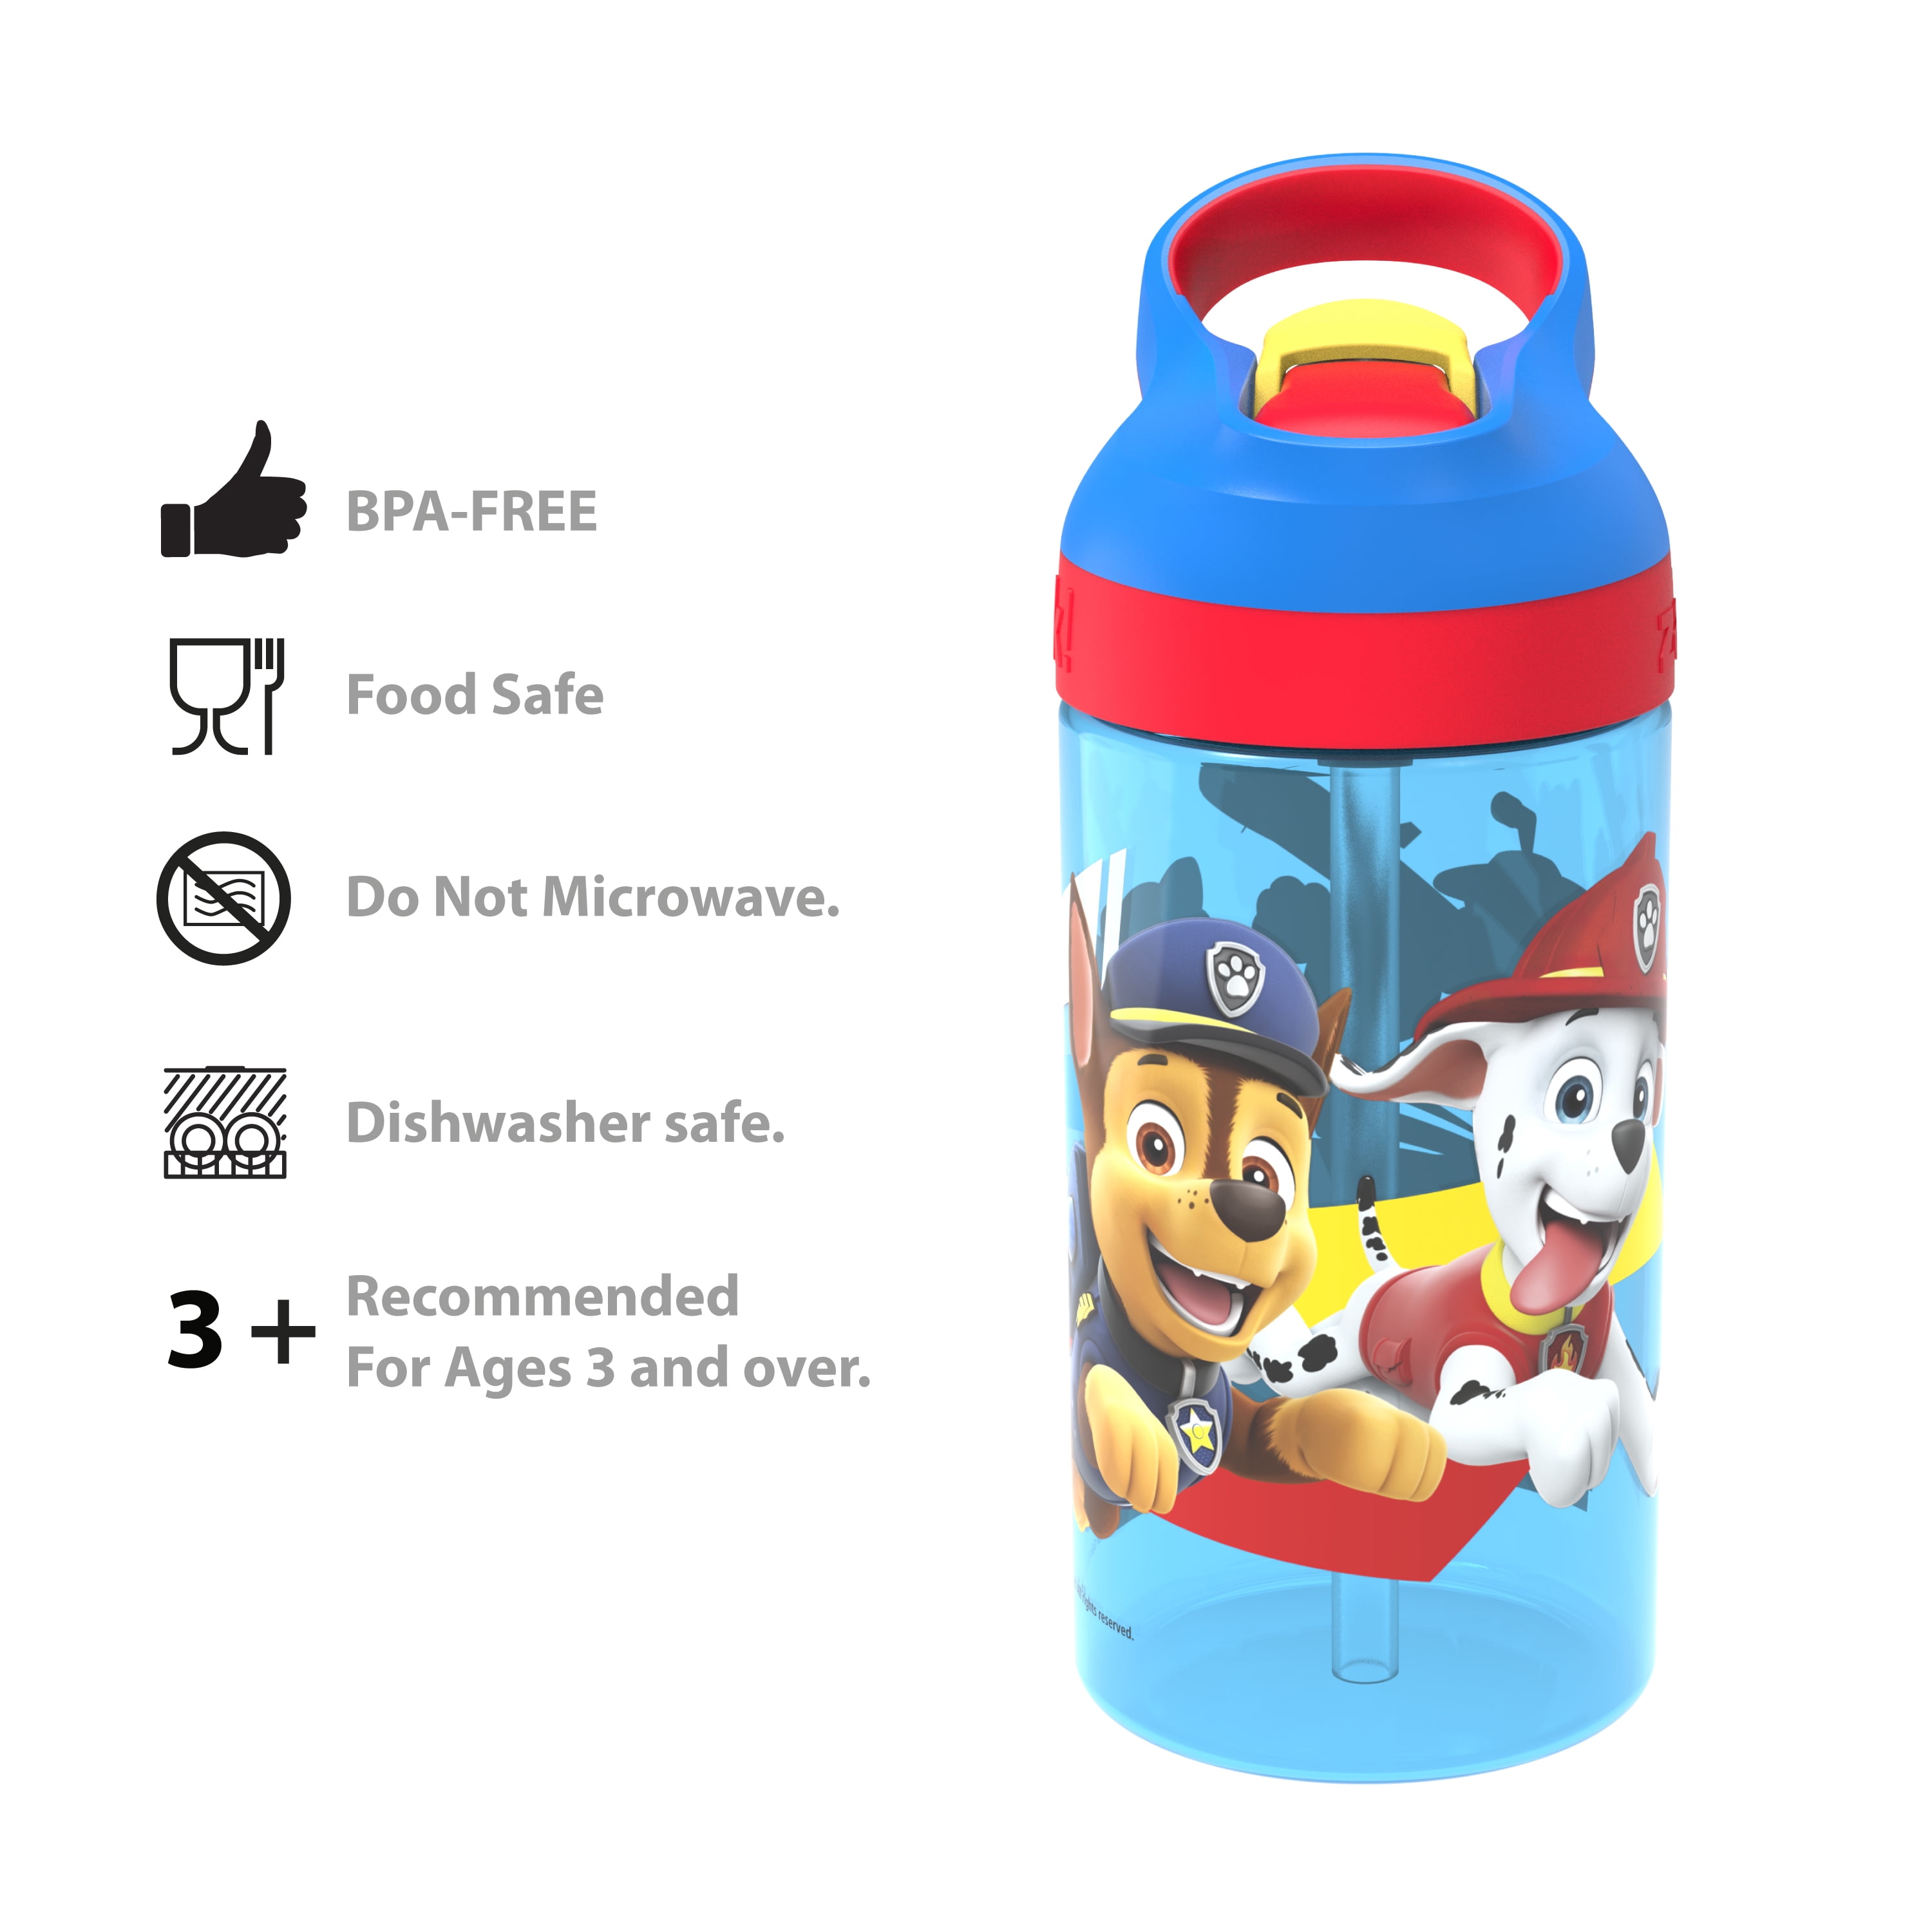 Zak Designs Paw Patrol Kids Dinnerware Includes 3-Section Divided Plate and  Utensil Made of Durable Material and Perfect for Kids (Chase, Marshall and  Friends, 3 Piece Set, BPA-Free) 